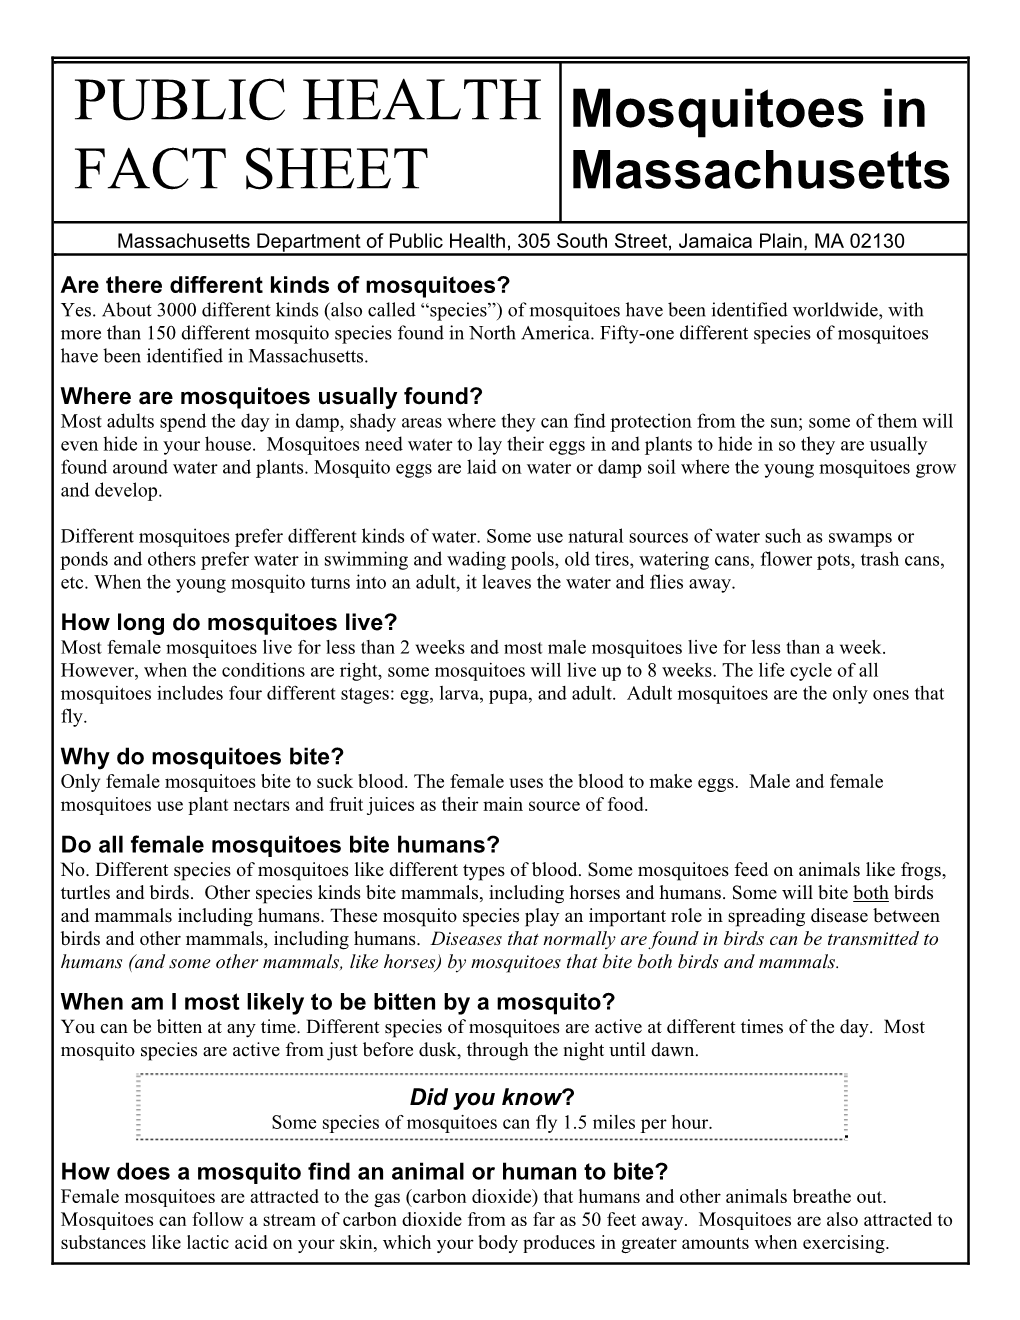 Public Health Fact Sheet on Mosquito Repellents Online At